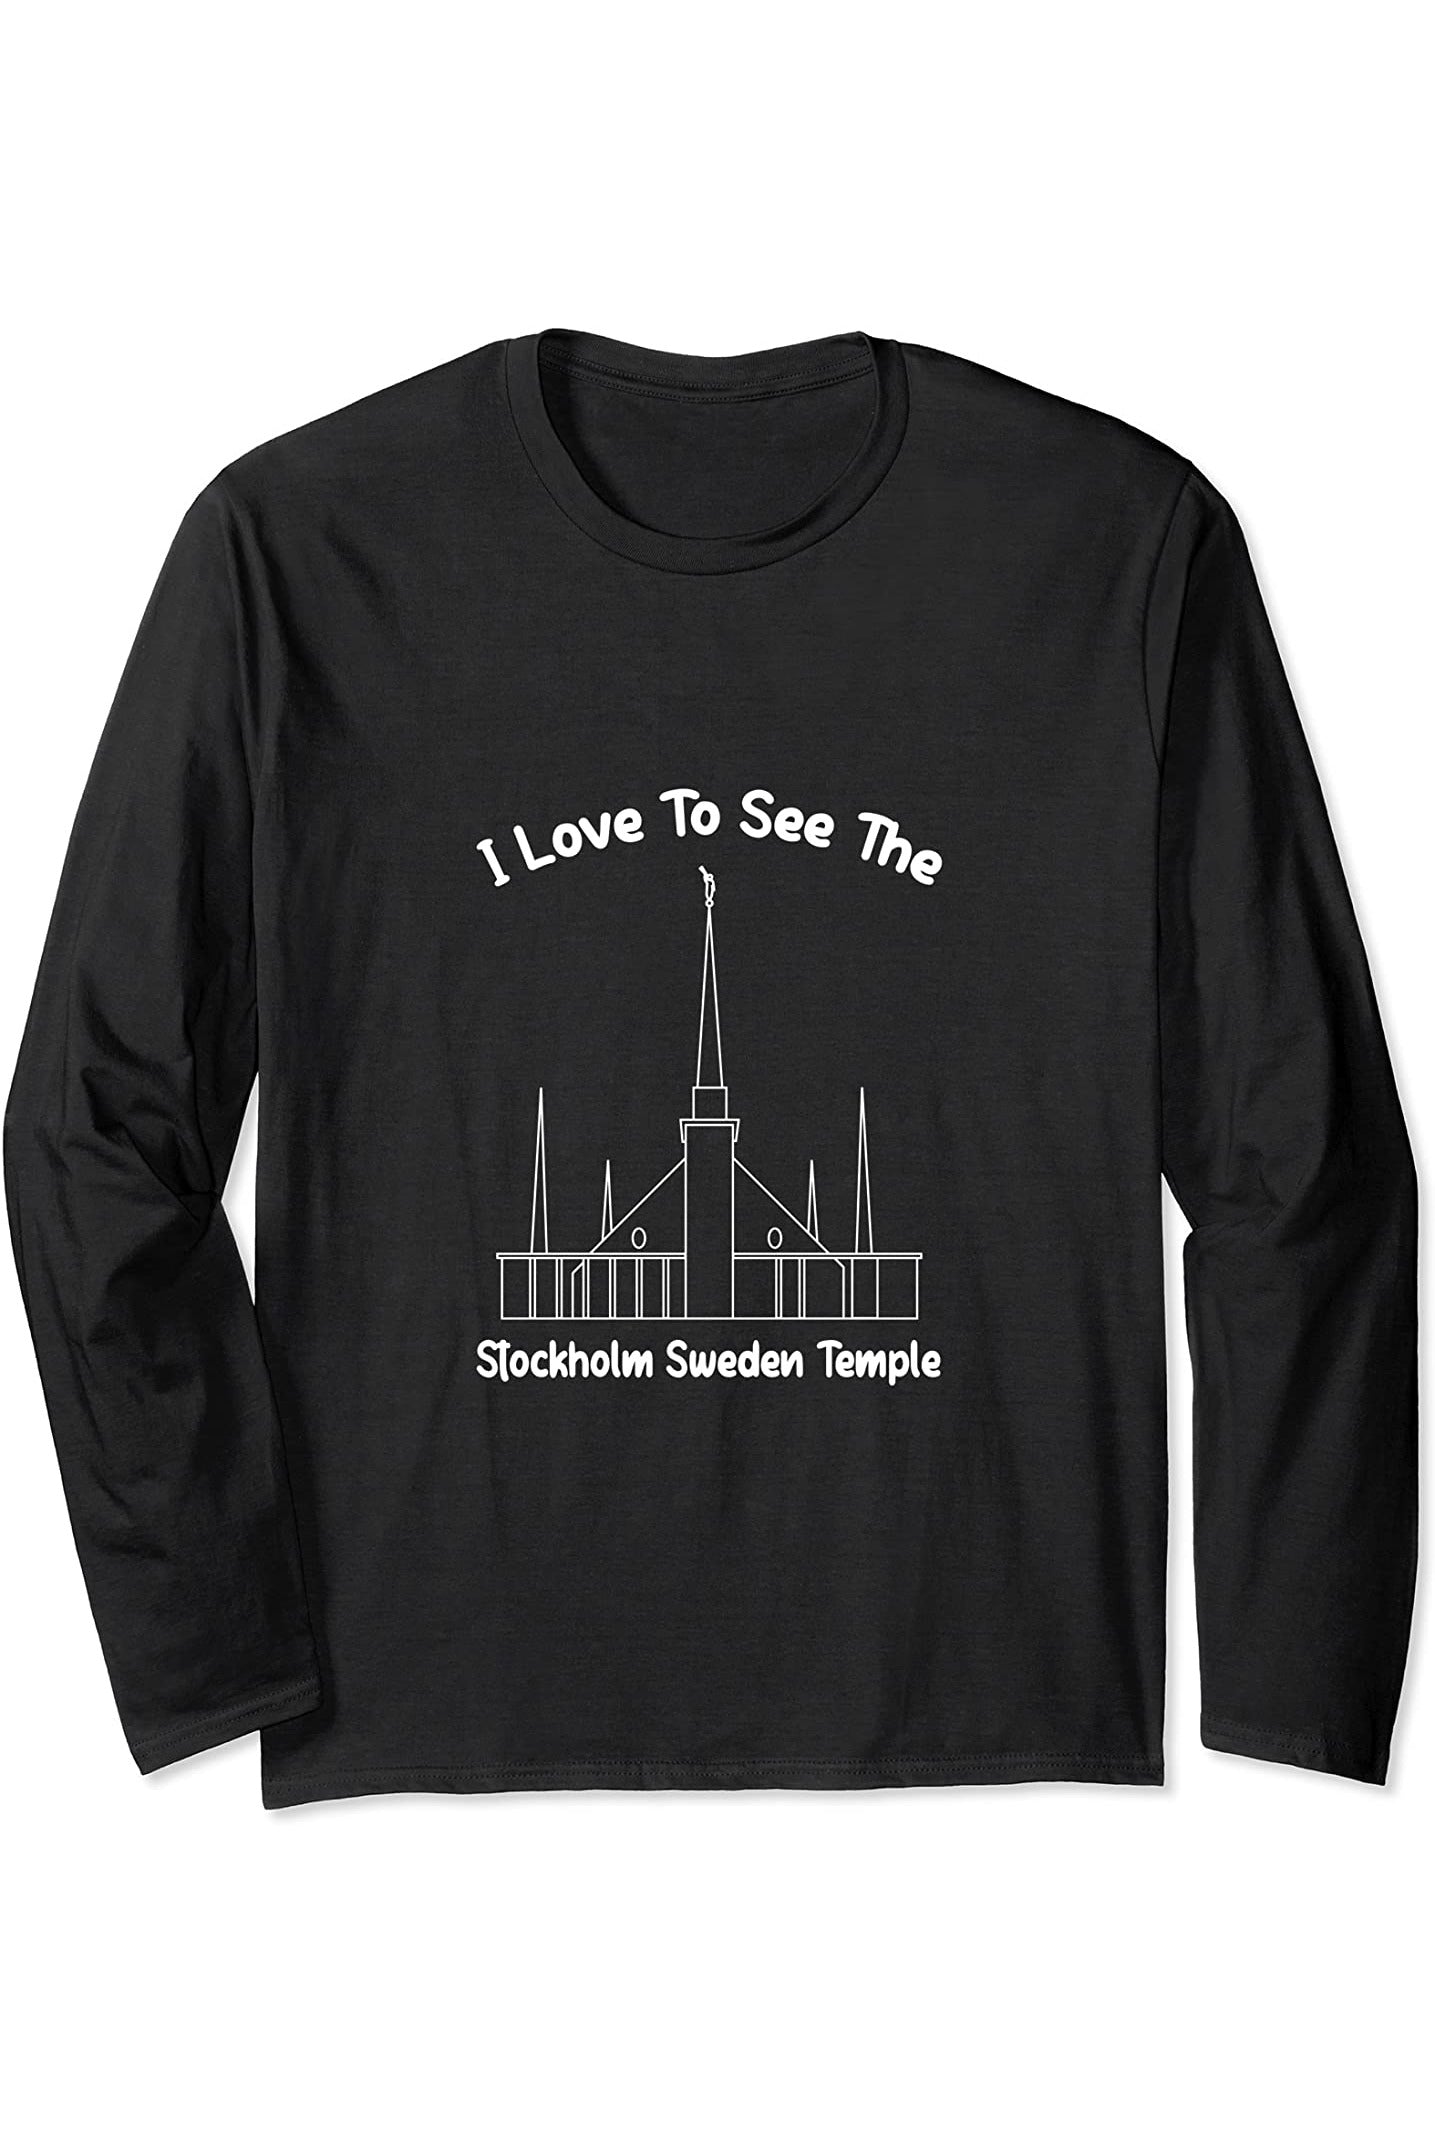 Stockholm Schweden Tempel, I love to see my temple, primary Long Sleeve T-Shirt